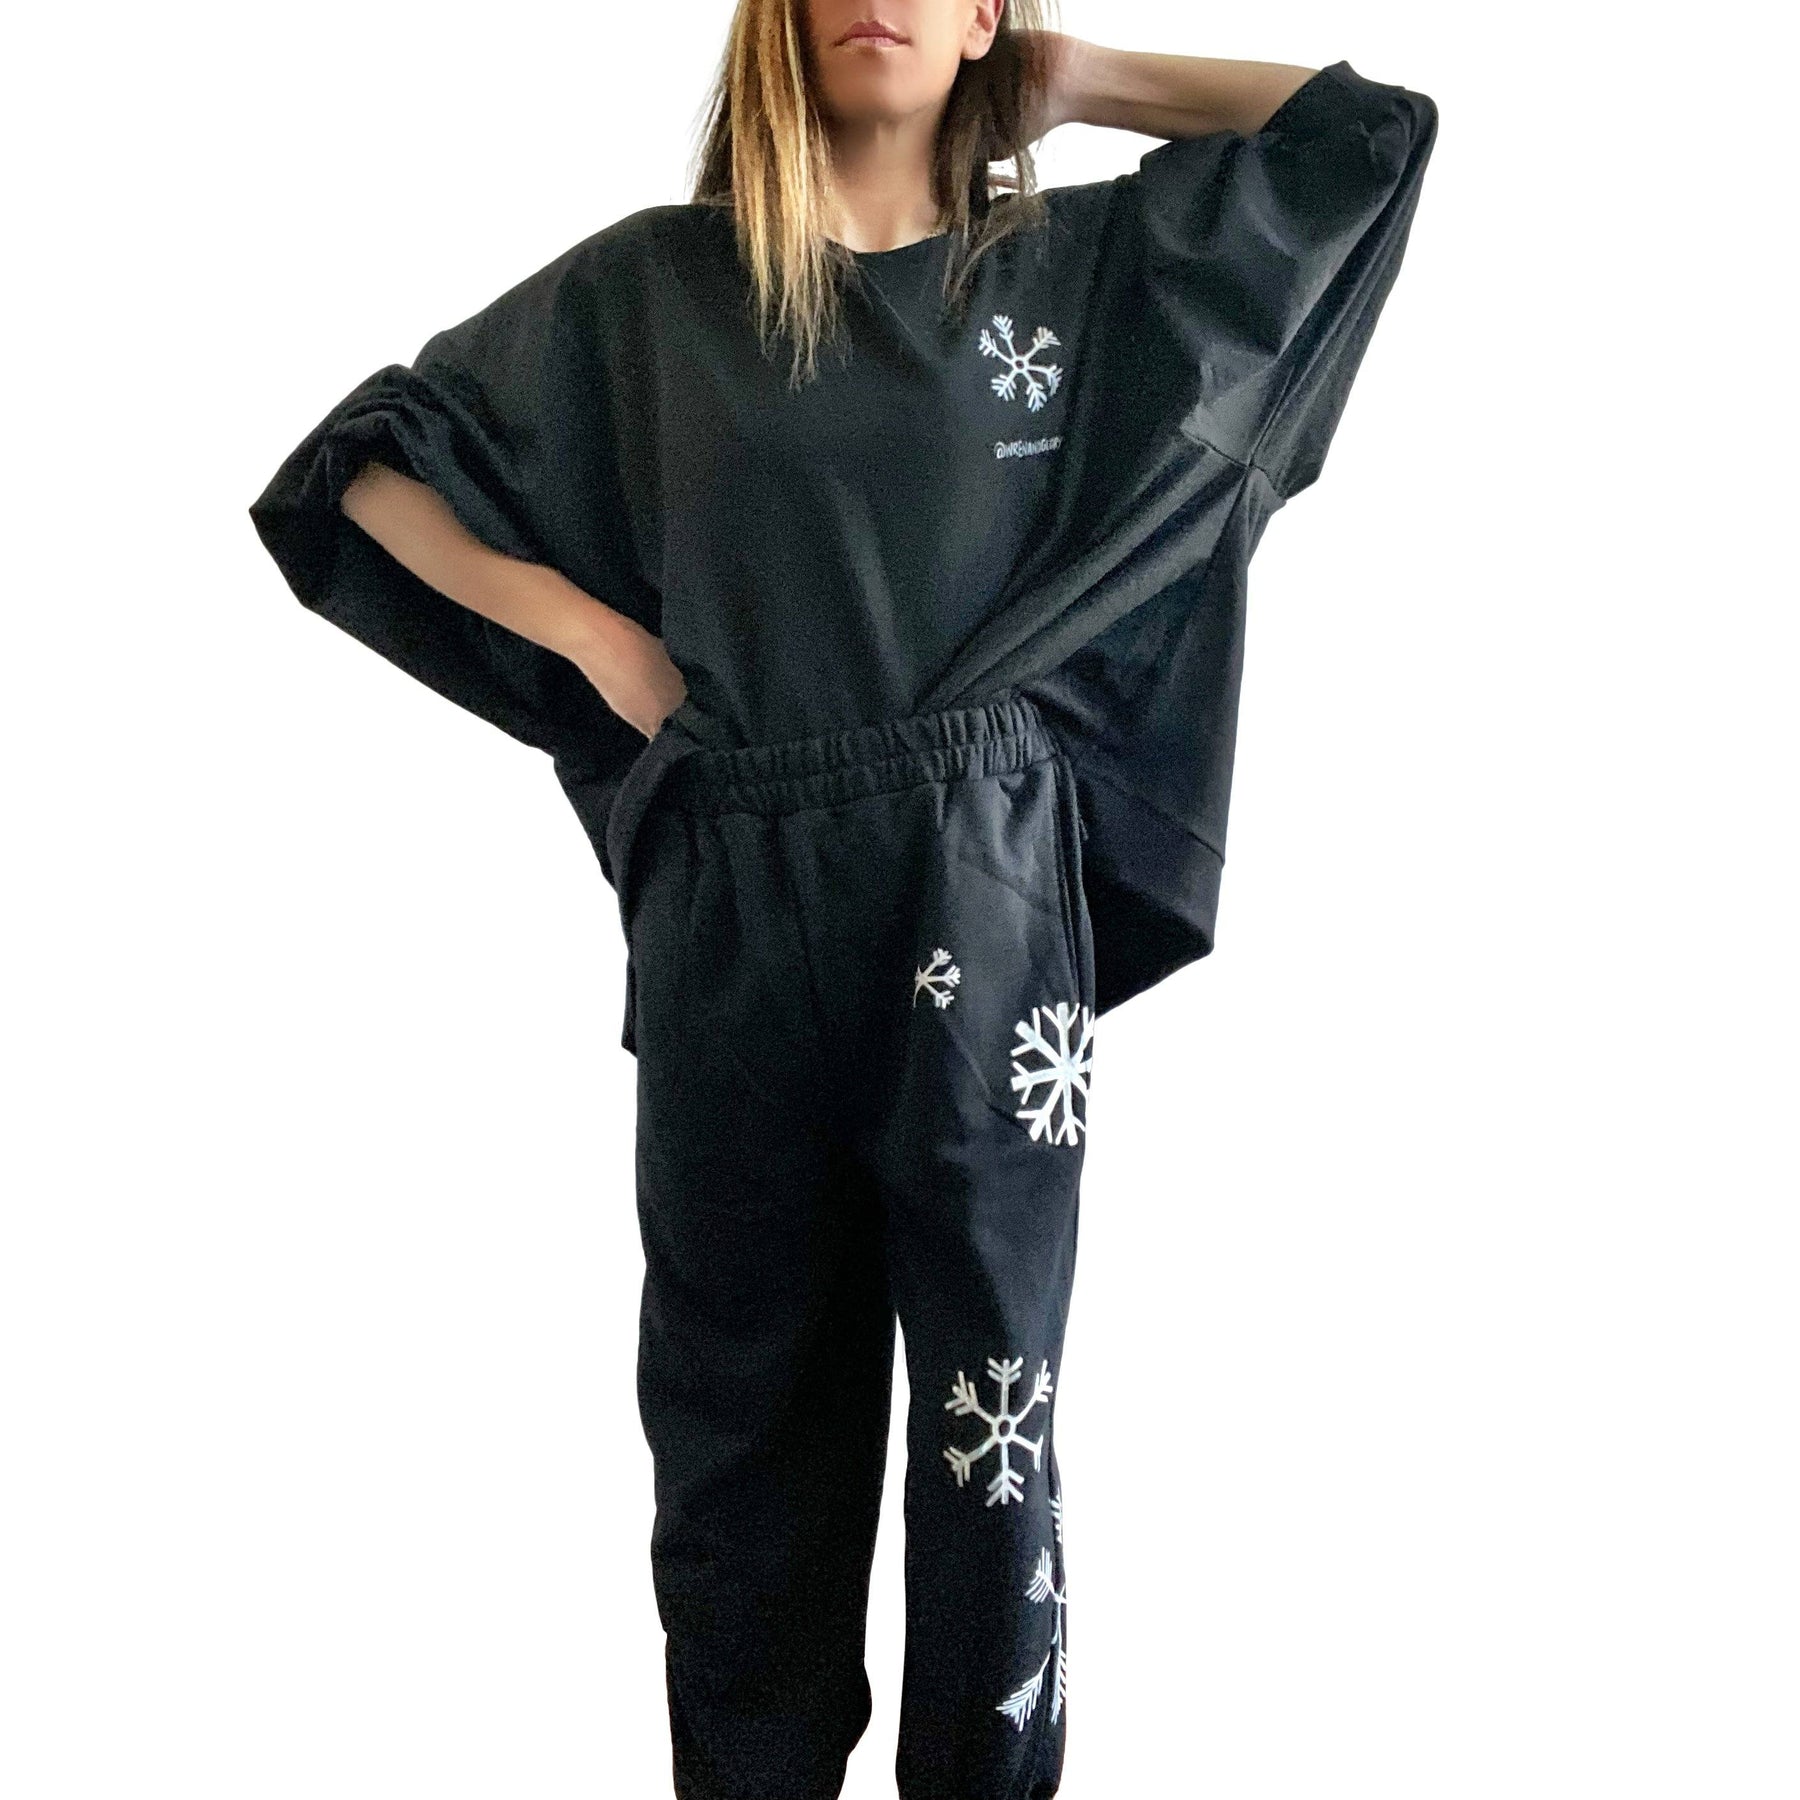 The perfect oversized sweatshirt & jogger loungewear set. TOP: PRAY FOR SURF (crossed out) SNOW painted on the back in white and blue. Small snowflake painted on front, left chest. BOTTOM: Assorted sized and shaped snowflakes painted down leg. Signed @wrenandglory on both top and bottom.